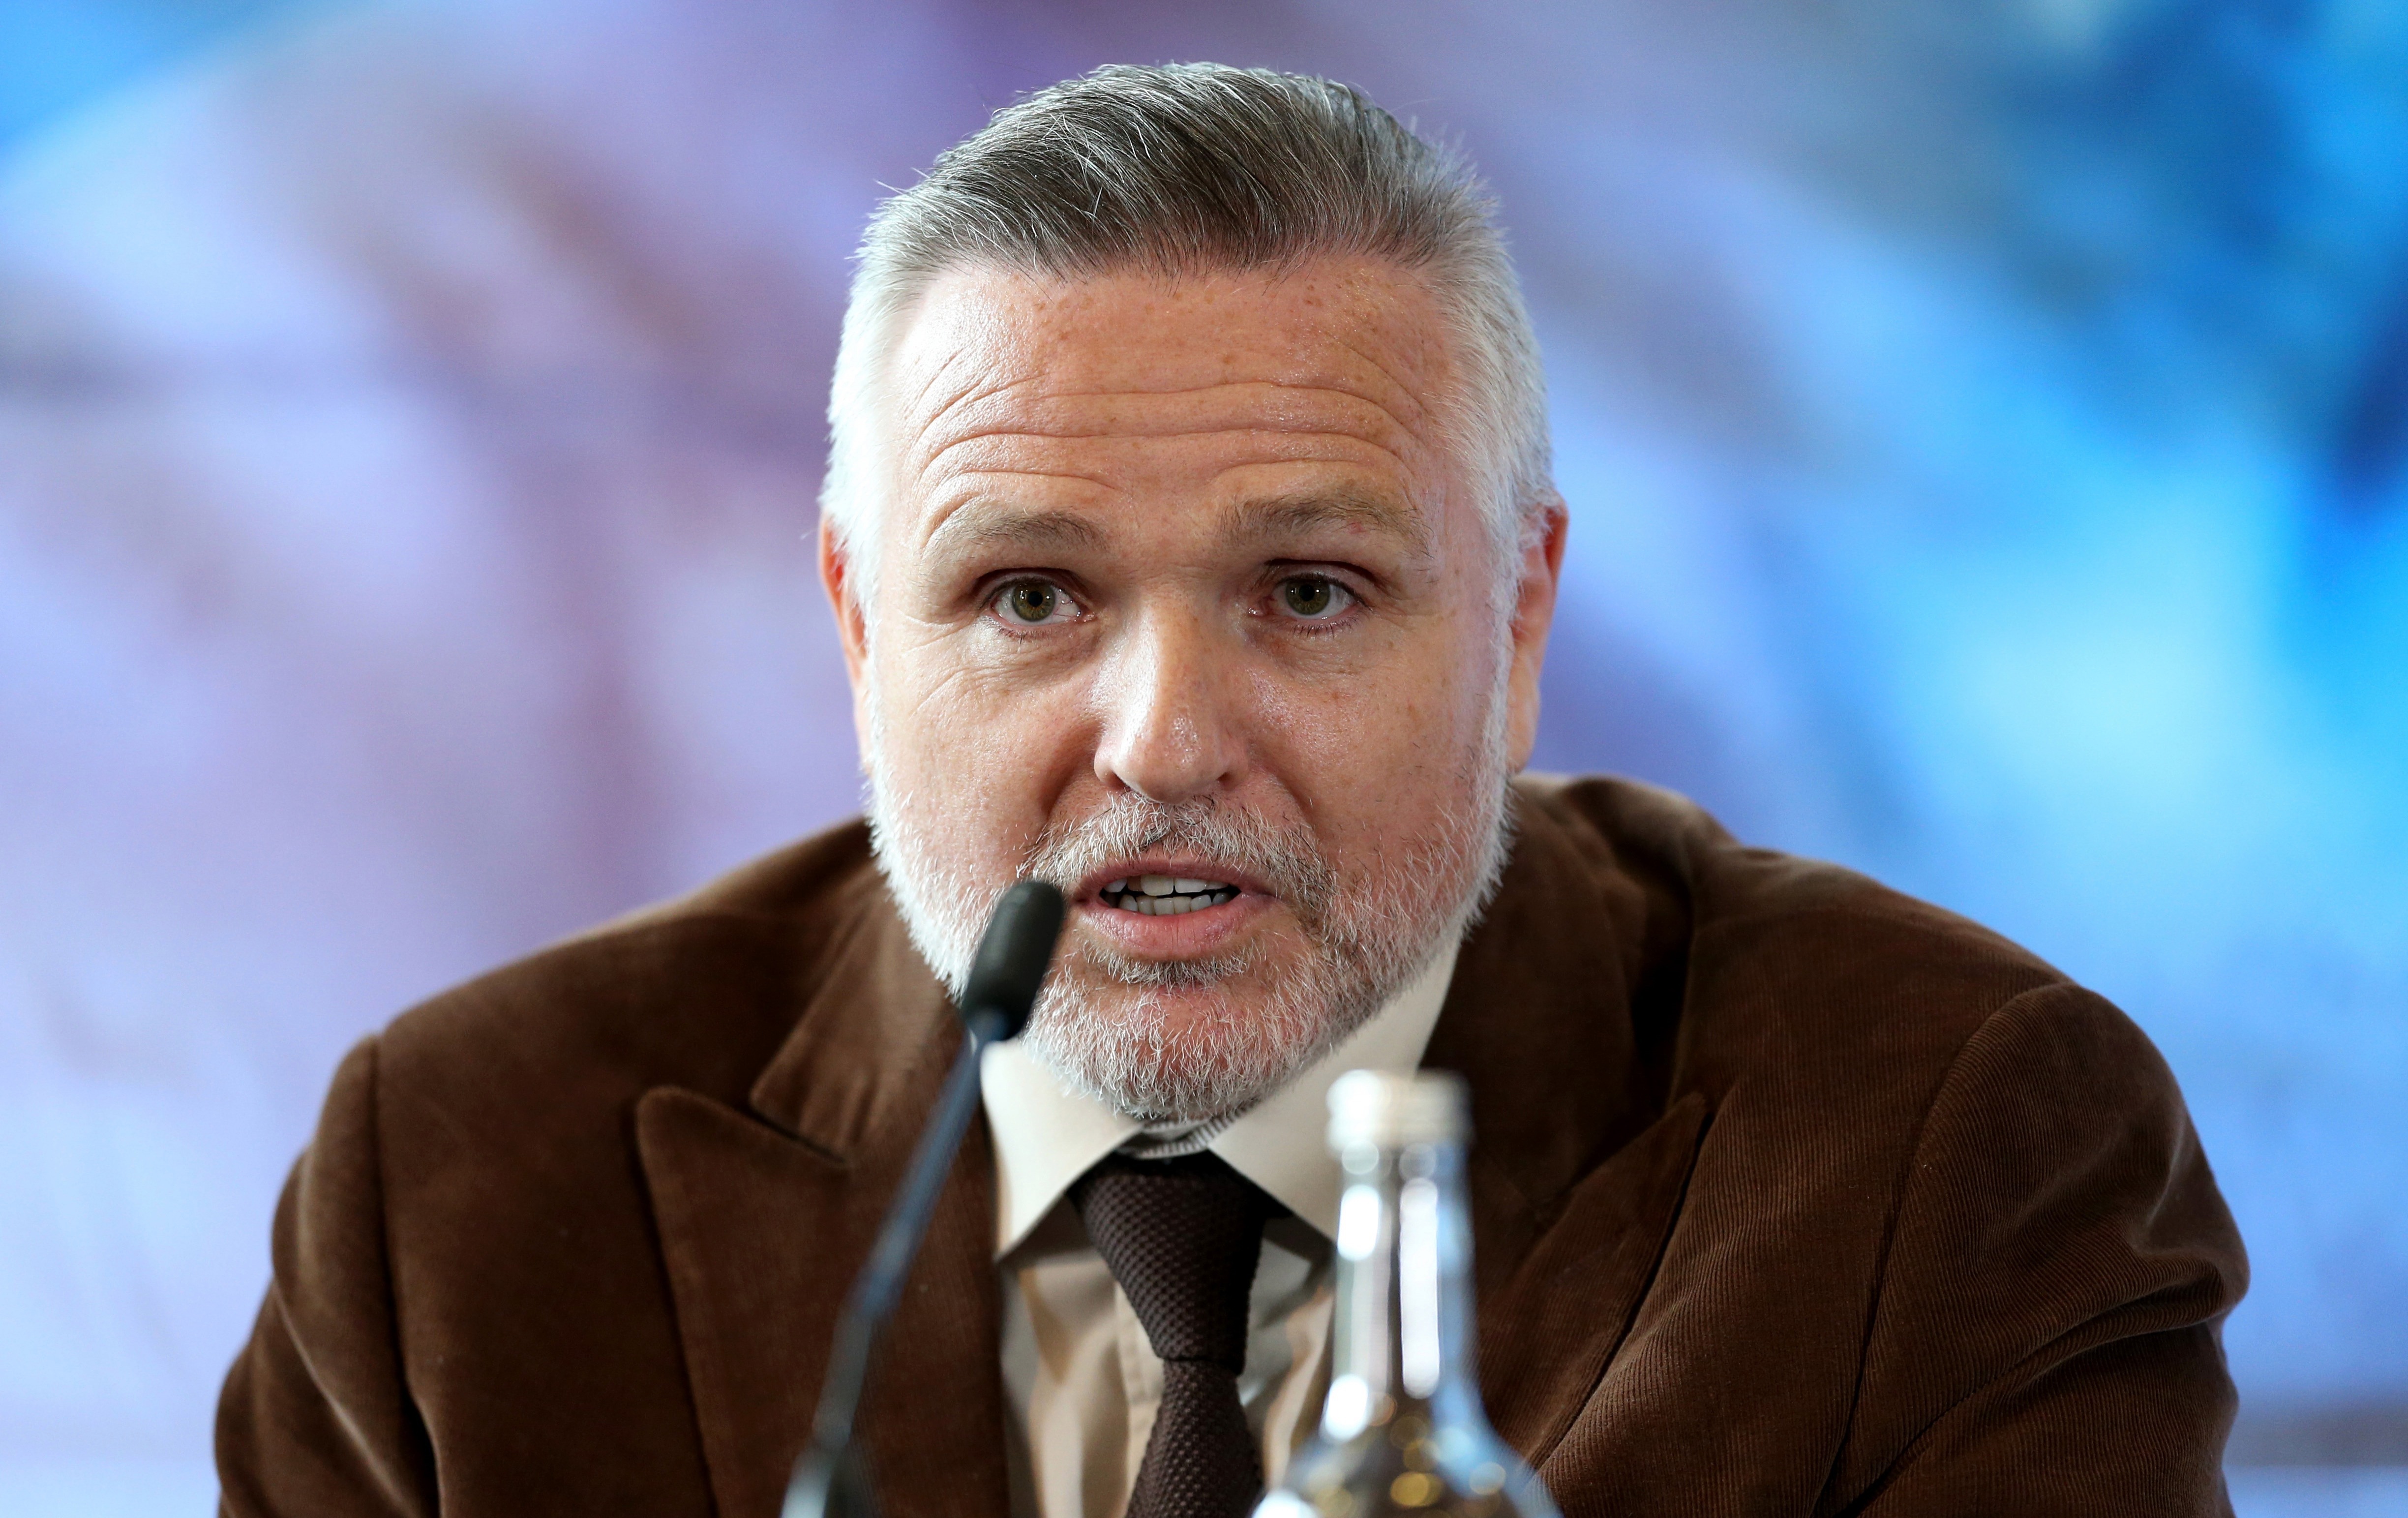 Peter Fury, whose son Hughie lost to Kubrat Pulev, has warned Joshua against complacency